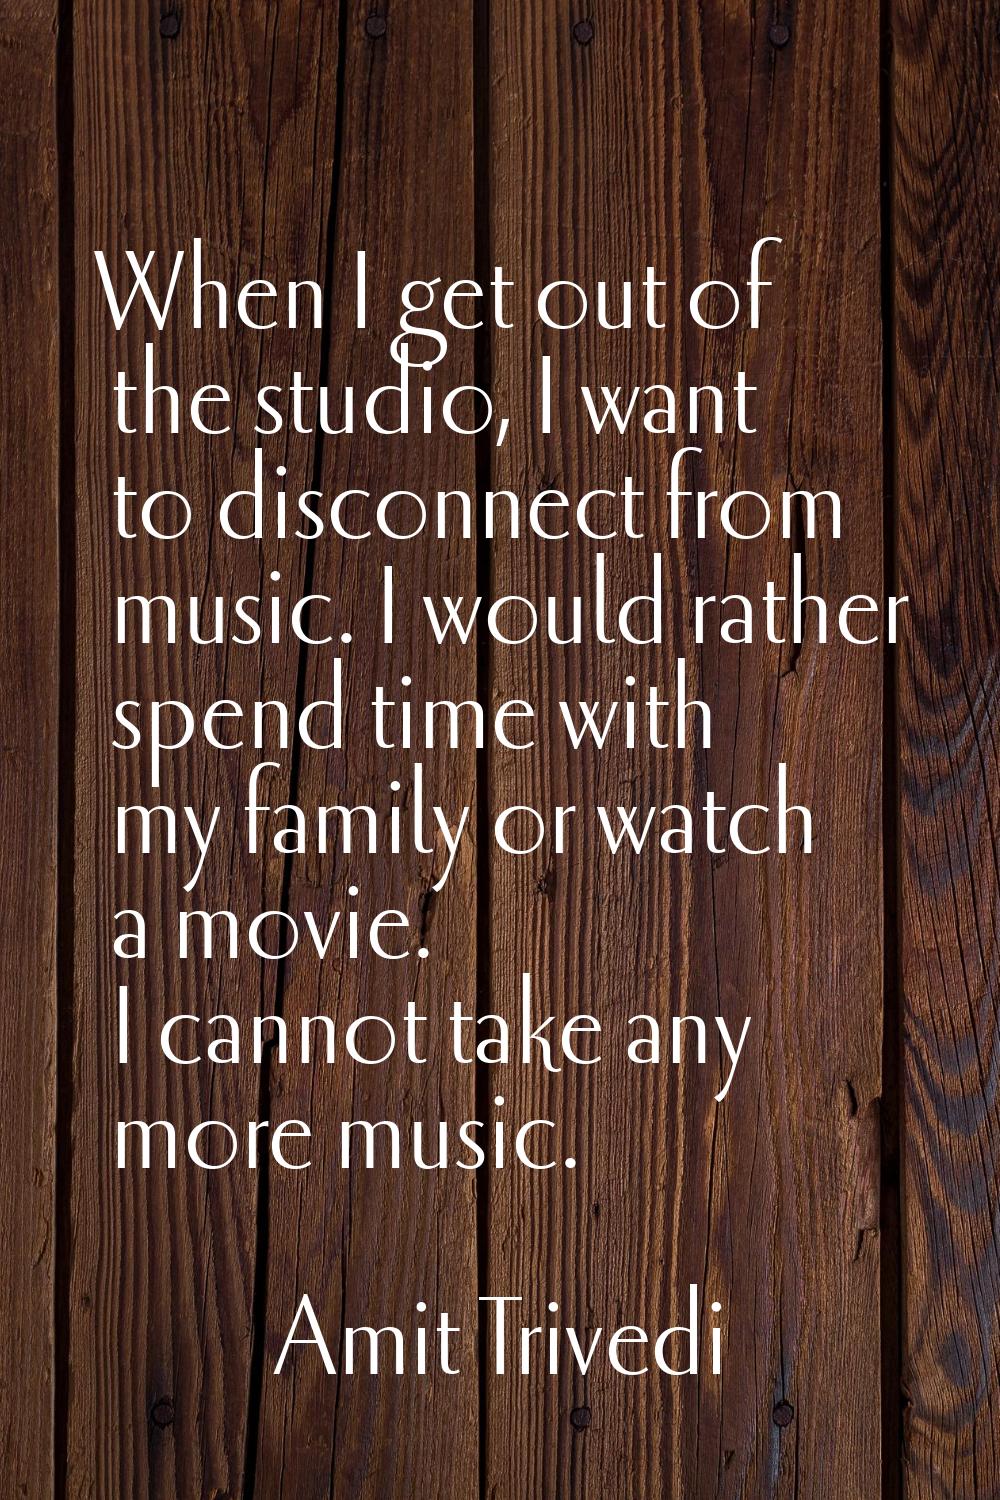 When I get out of the studio, I want to disconnect from music. I would rather spend time with my fa